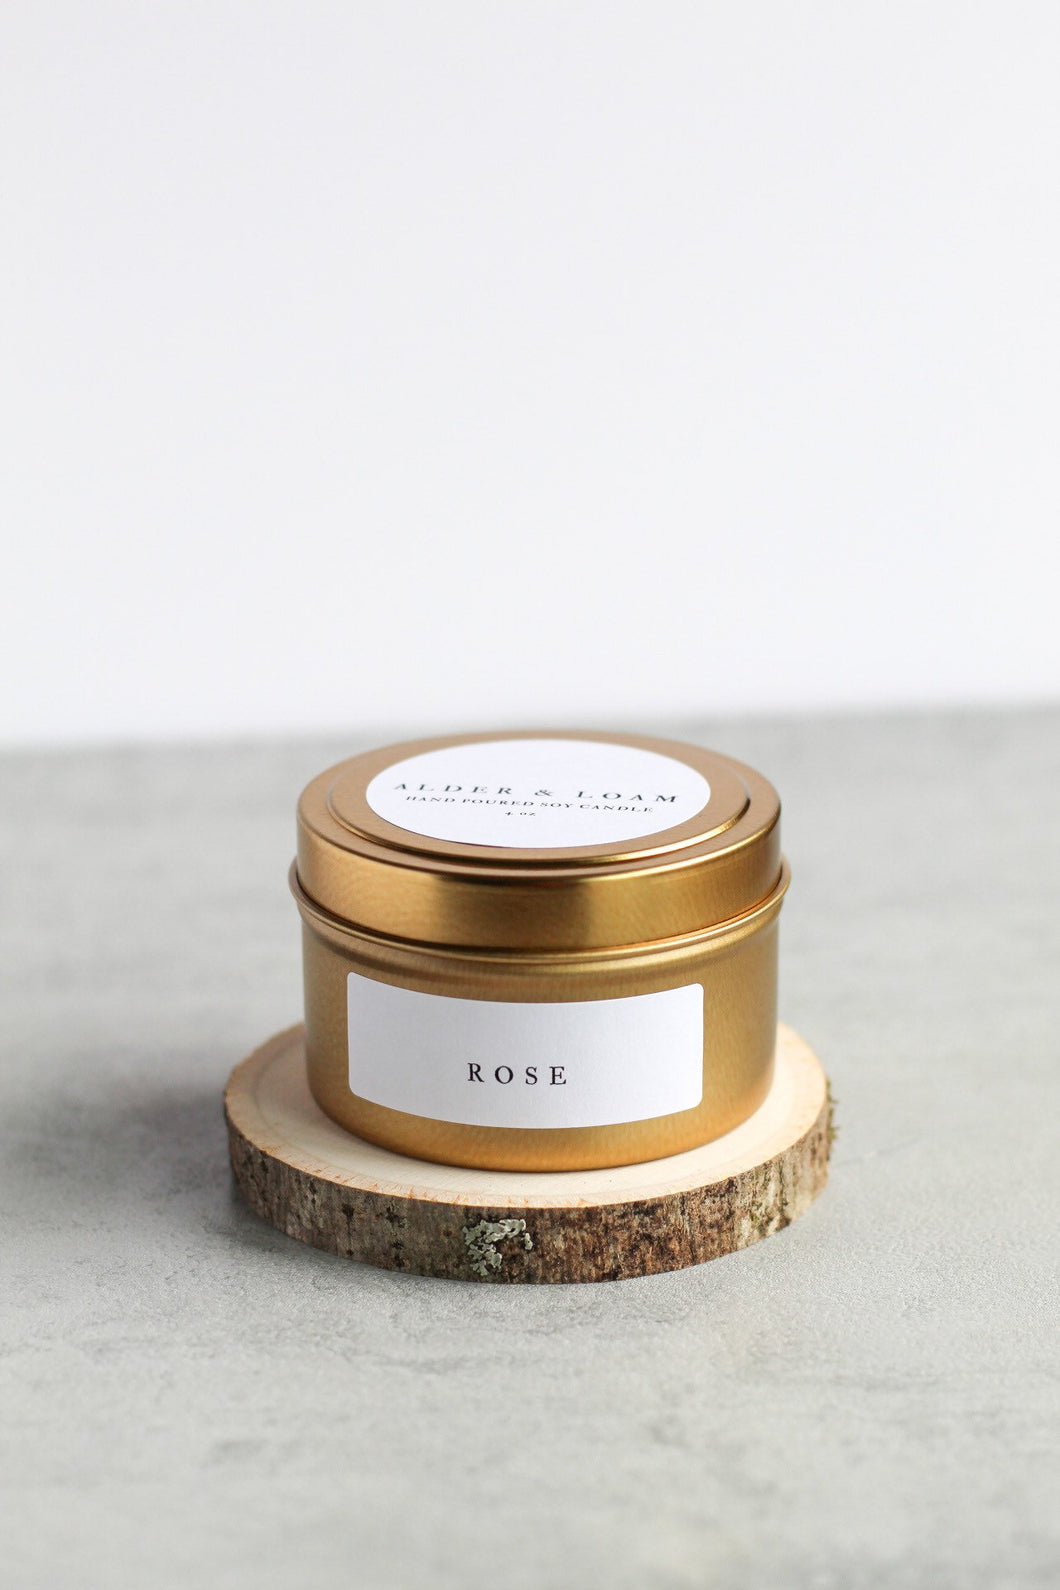 Rose Soy Candle, Hand Poured, Natural, Eco Friendly, Earthy Scent, 4 oz tin